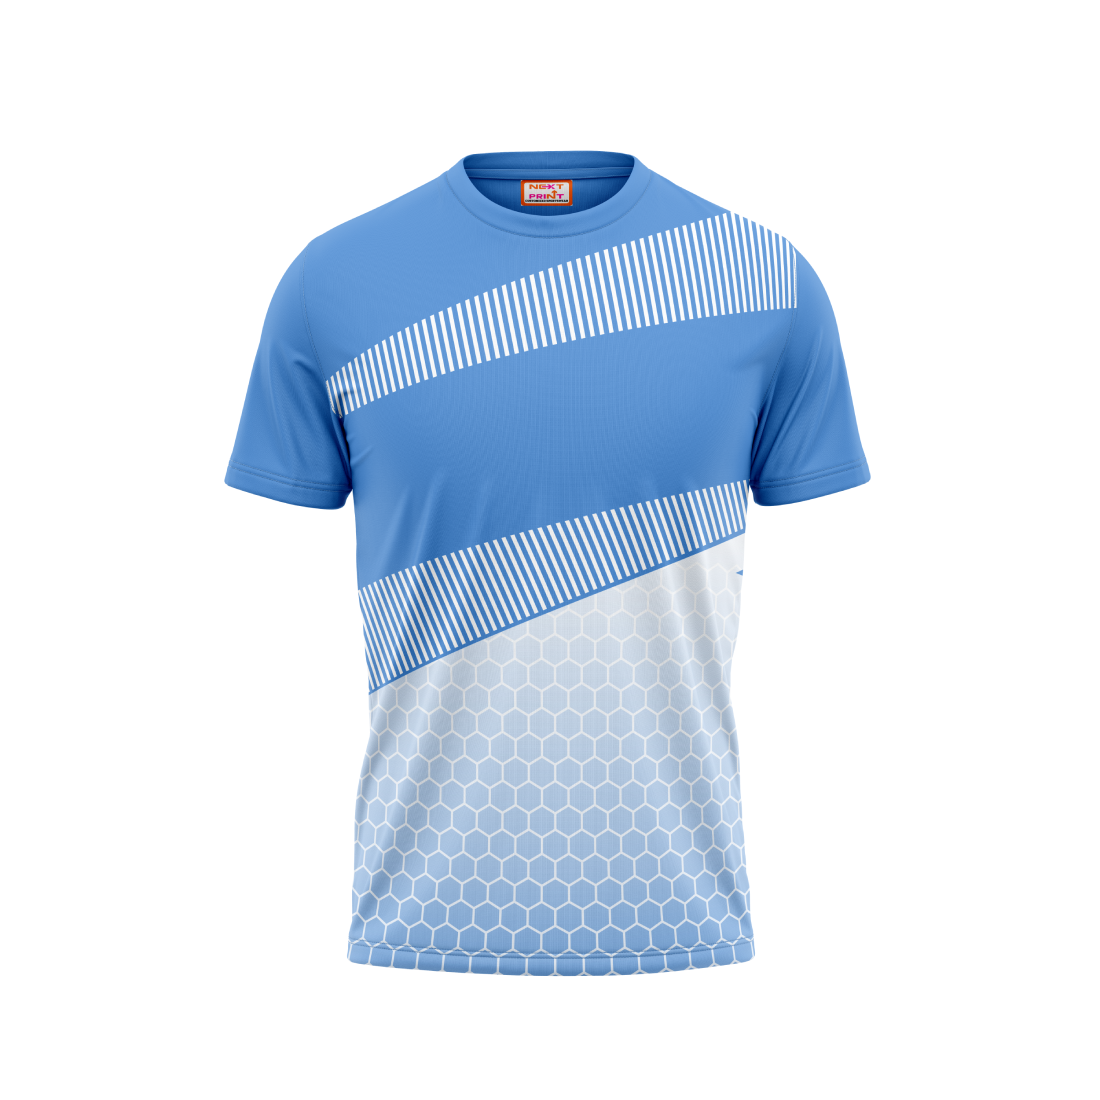 Round Neck Printed Jersey Skyblue NP0047